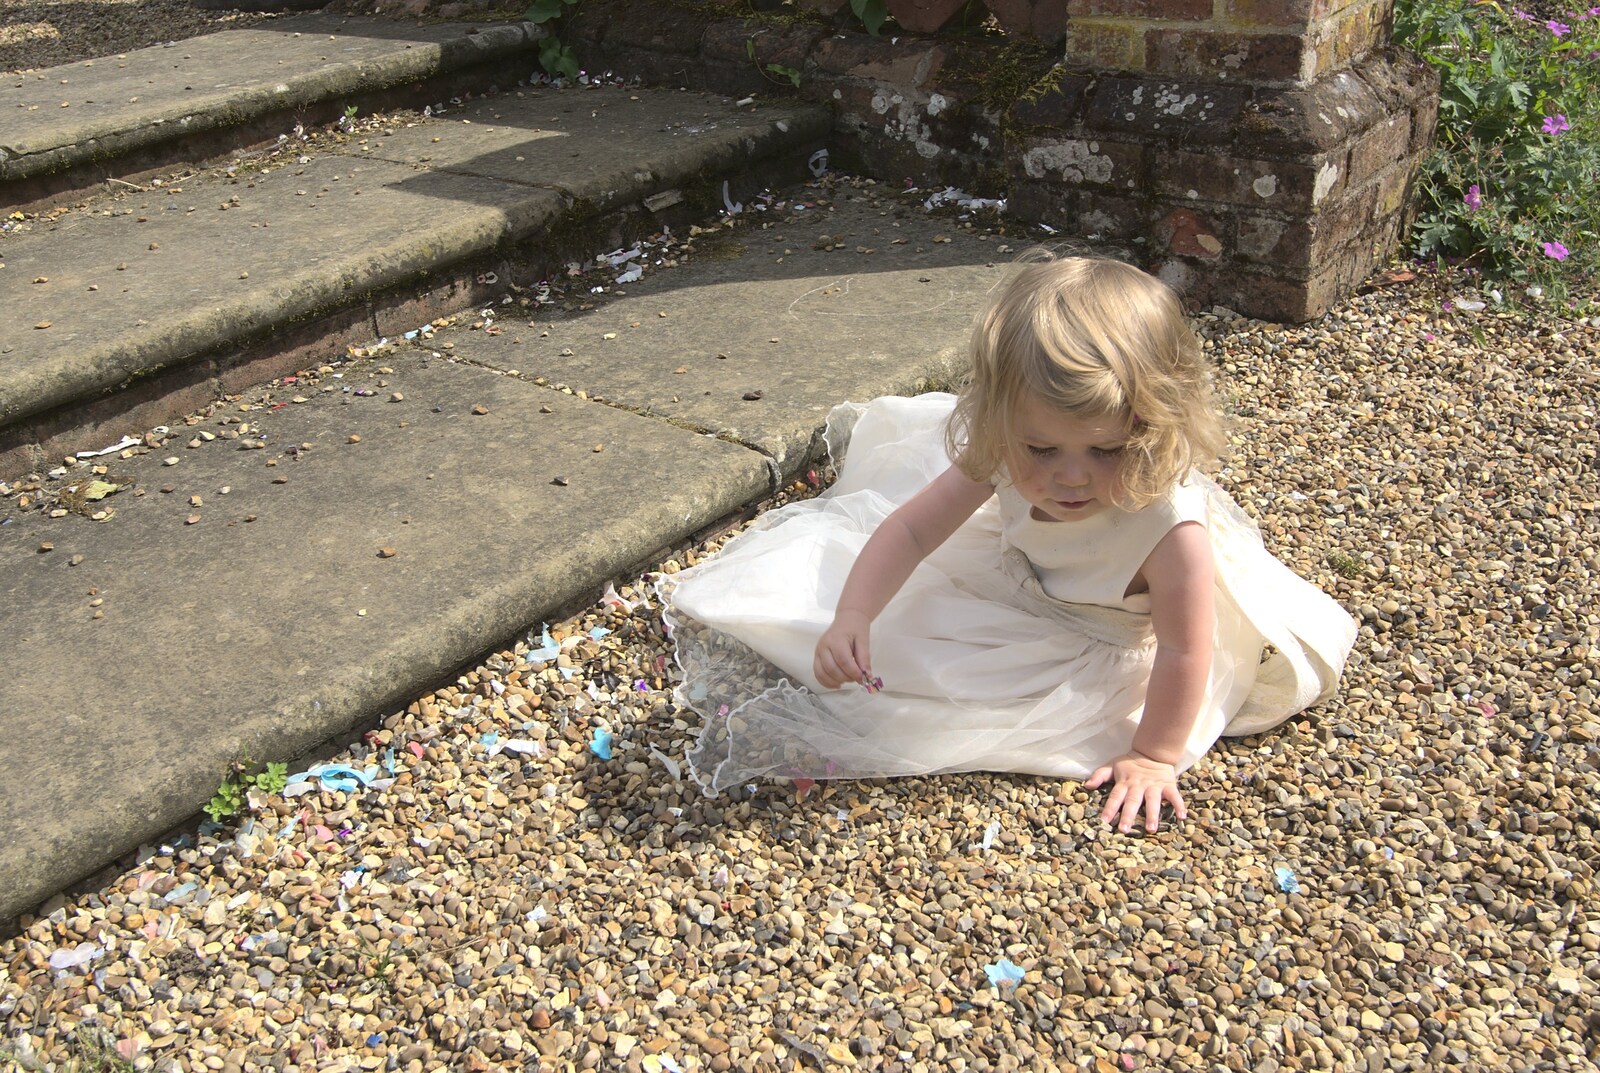 Amelia pokes around in the gravel from Nosher and Isobel's Wedding, Brome, Suffolk - 3rd July 2010